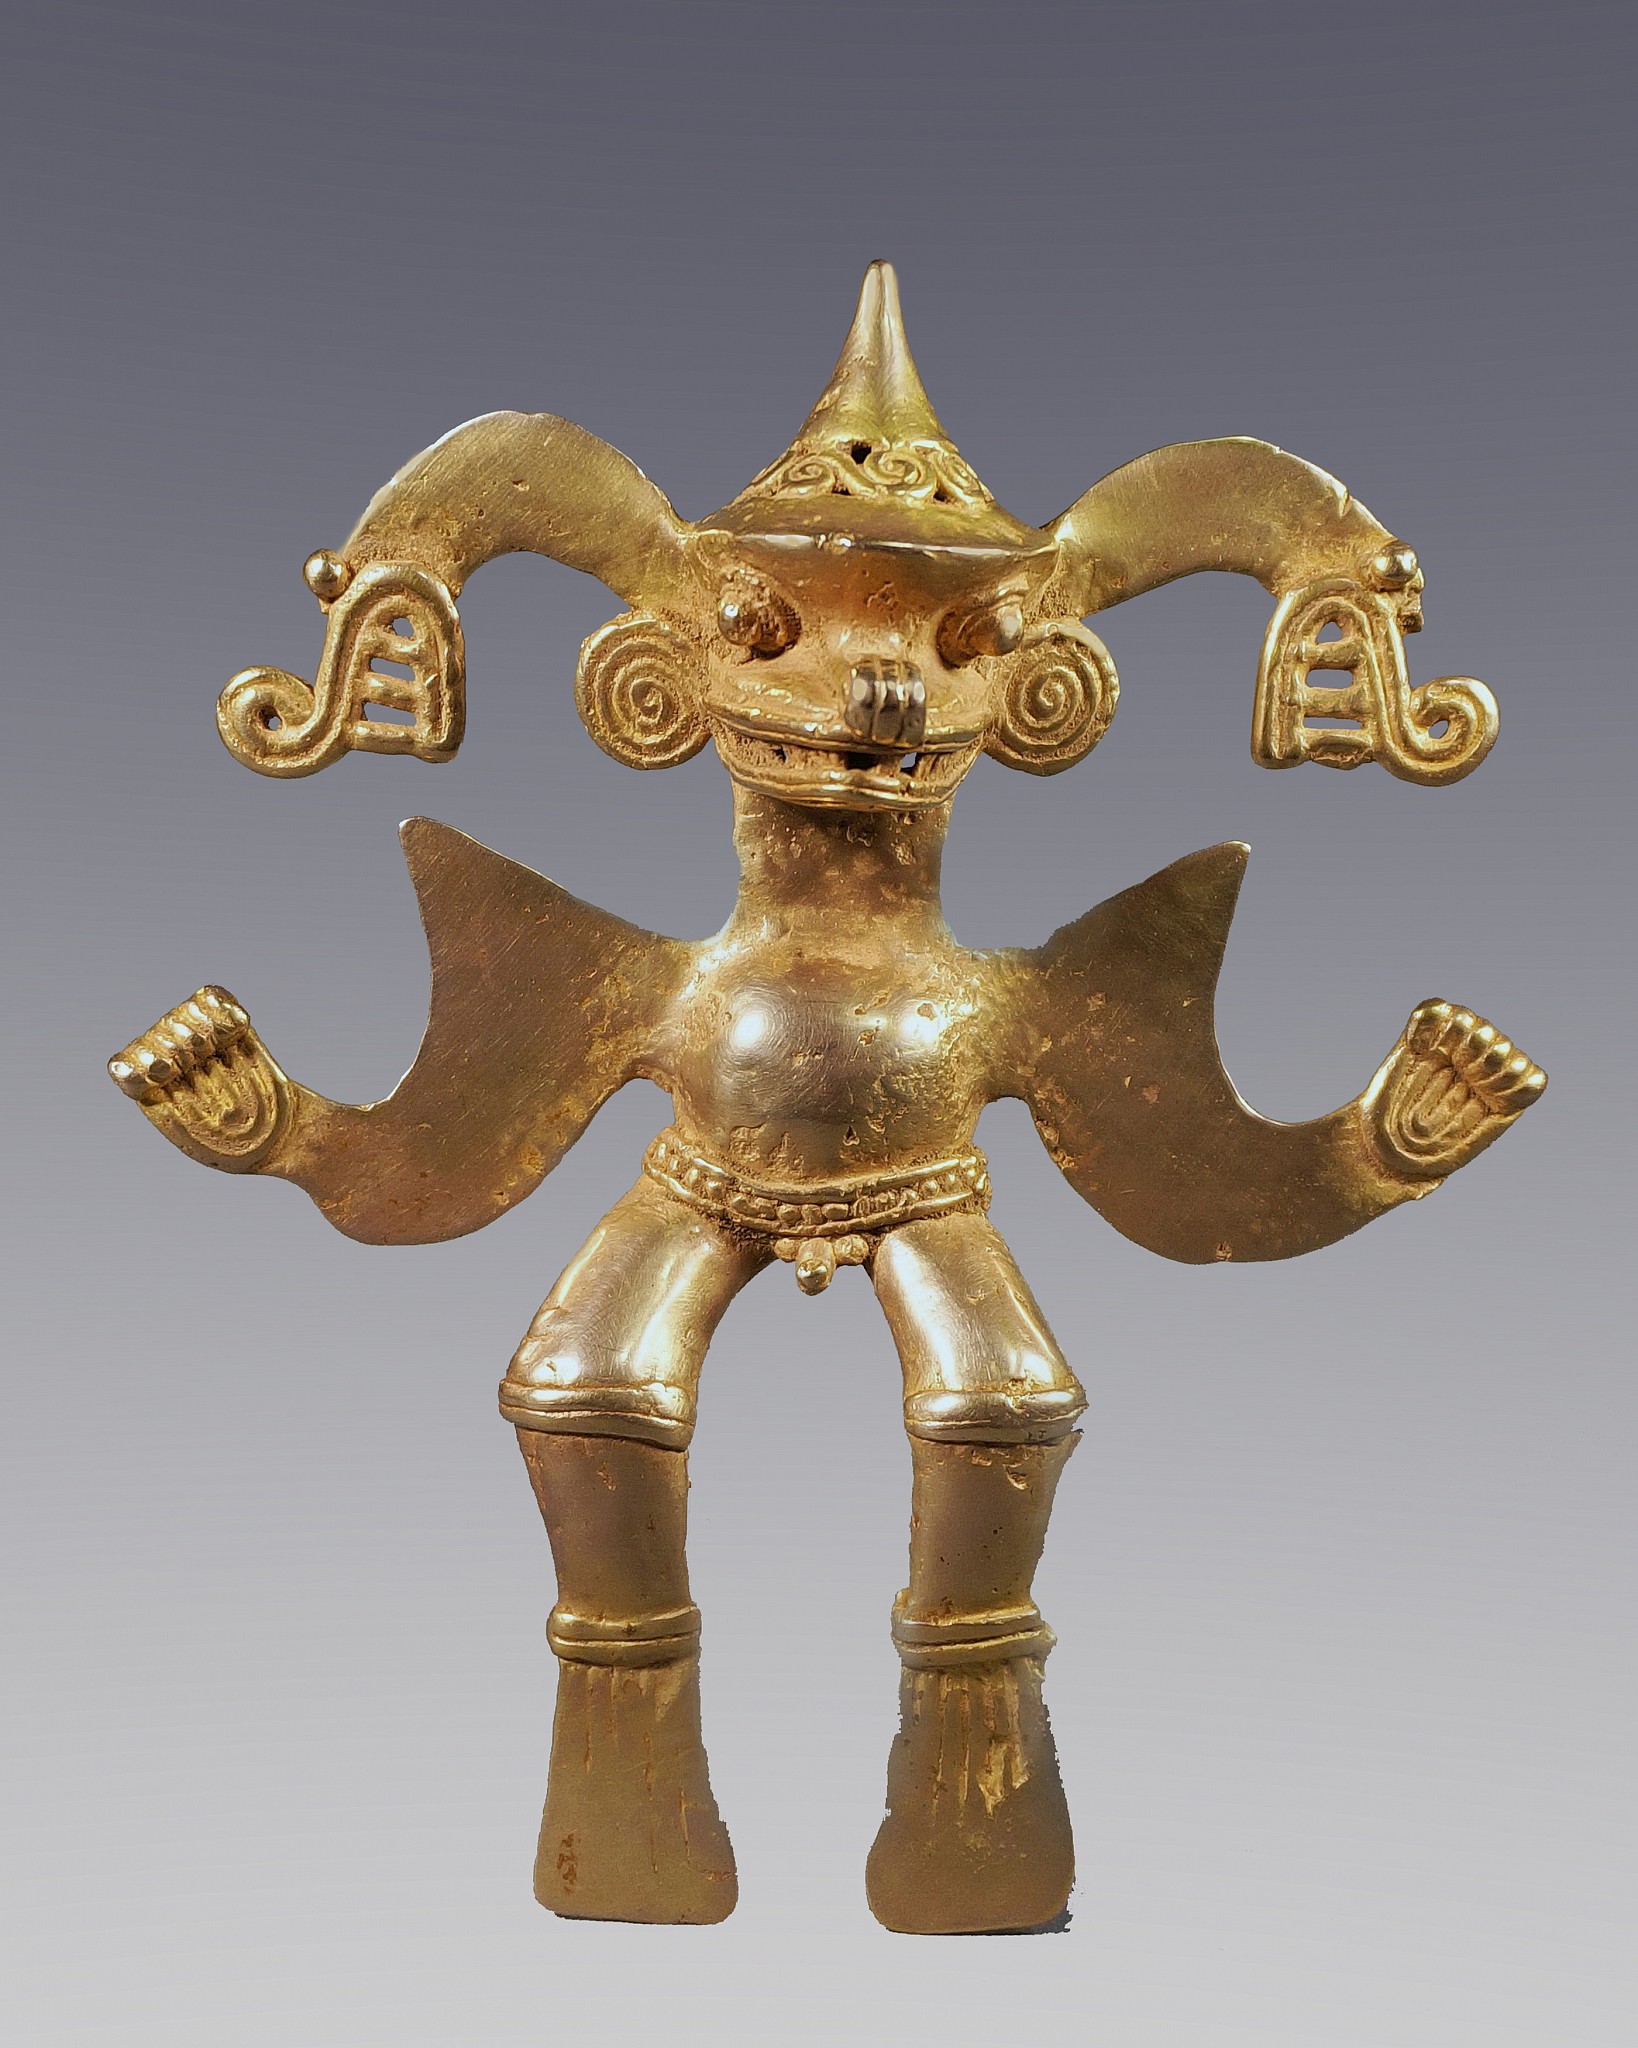 Costa Rica, Diquis Cast Gold Anthropomorphic Figure with a Cone Shaped Crown
The figure has a crocodilian nose and mouth with serpents emanating from his head and wears a cone-shaped crown.  His hands are held outward with broad shoulders which could also be wings, and his flipper-shaped feet are typical of the Diquis region which borders Panama. Crocodiles, or Saurians are not often depicted as standalone figures.  A very similar shaped figure, but smaller and without the helmet is illustrated in THE ART OF PRECOLUMBIAN GOLD - The Jan Mitchell Collection, #6.   Another similar figure is in the Janssen Collection in Antwerp.  Both have a male phallus.   
Media: Metal
Dimensions: Height: 4 3/16" x Width:3 3/4",Weight: 99.6 gramsXRF Au. 72%, Cu. 24%, Ag. 2.4%
Price Upon Request
n7031